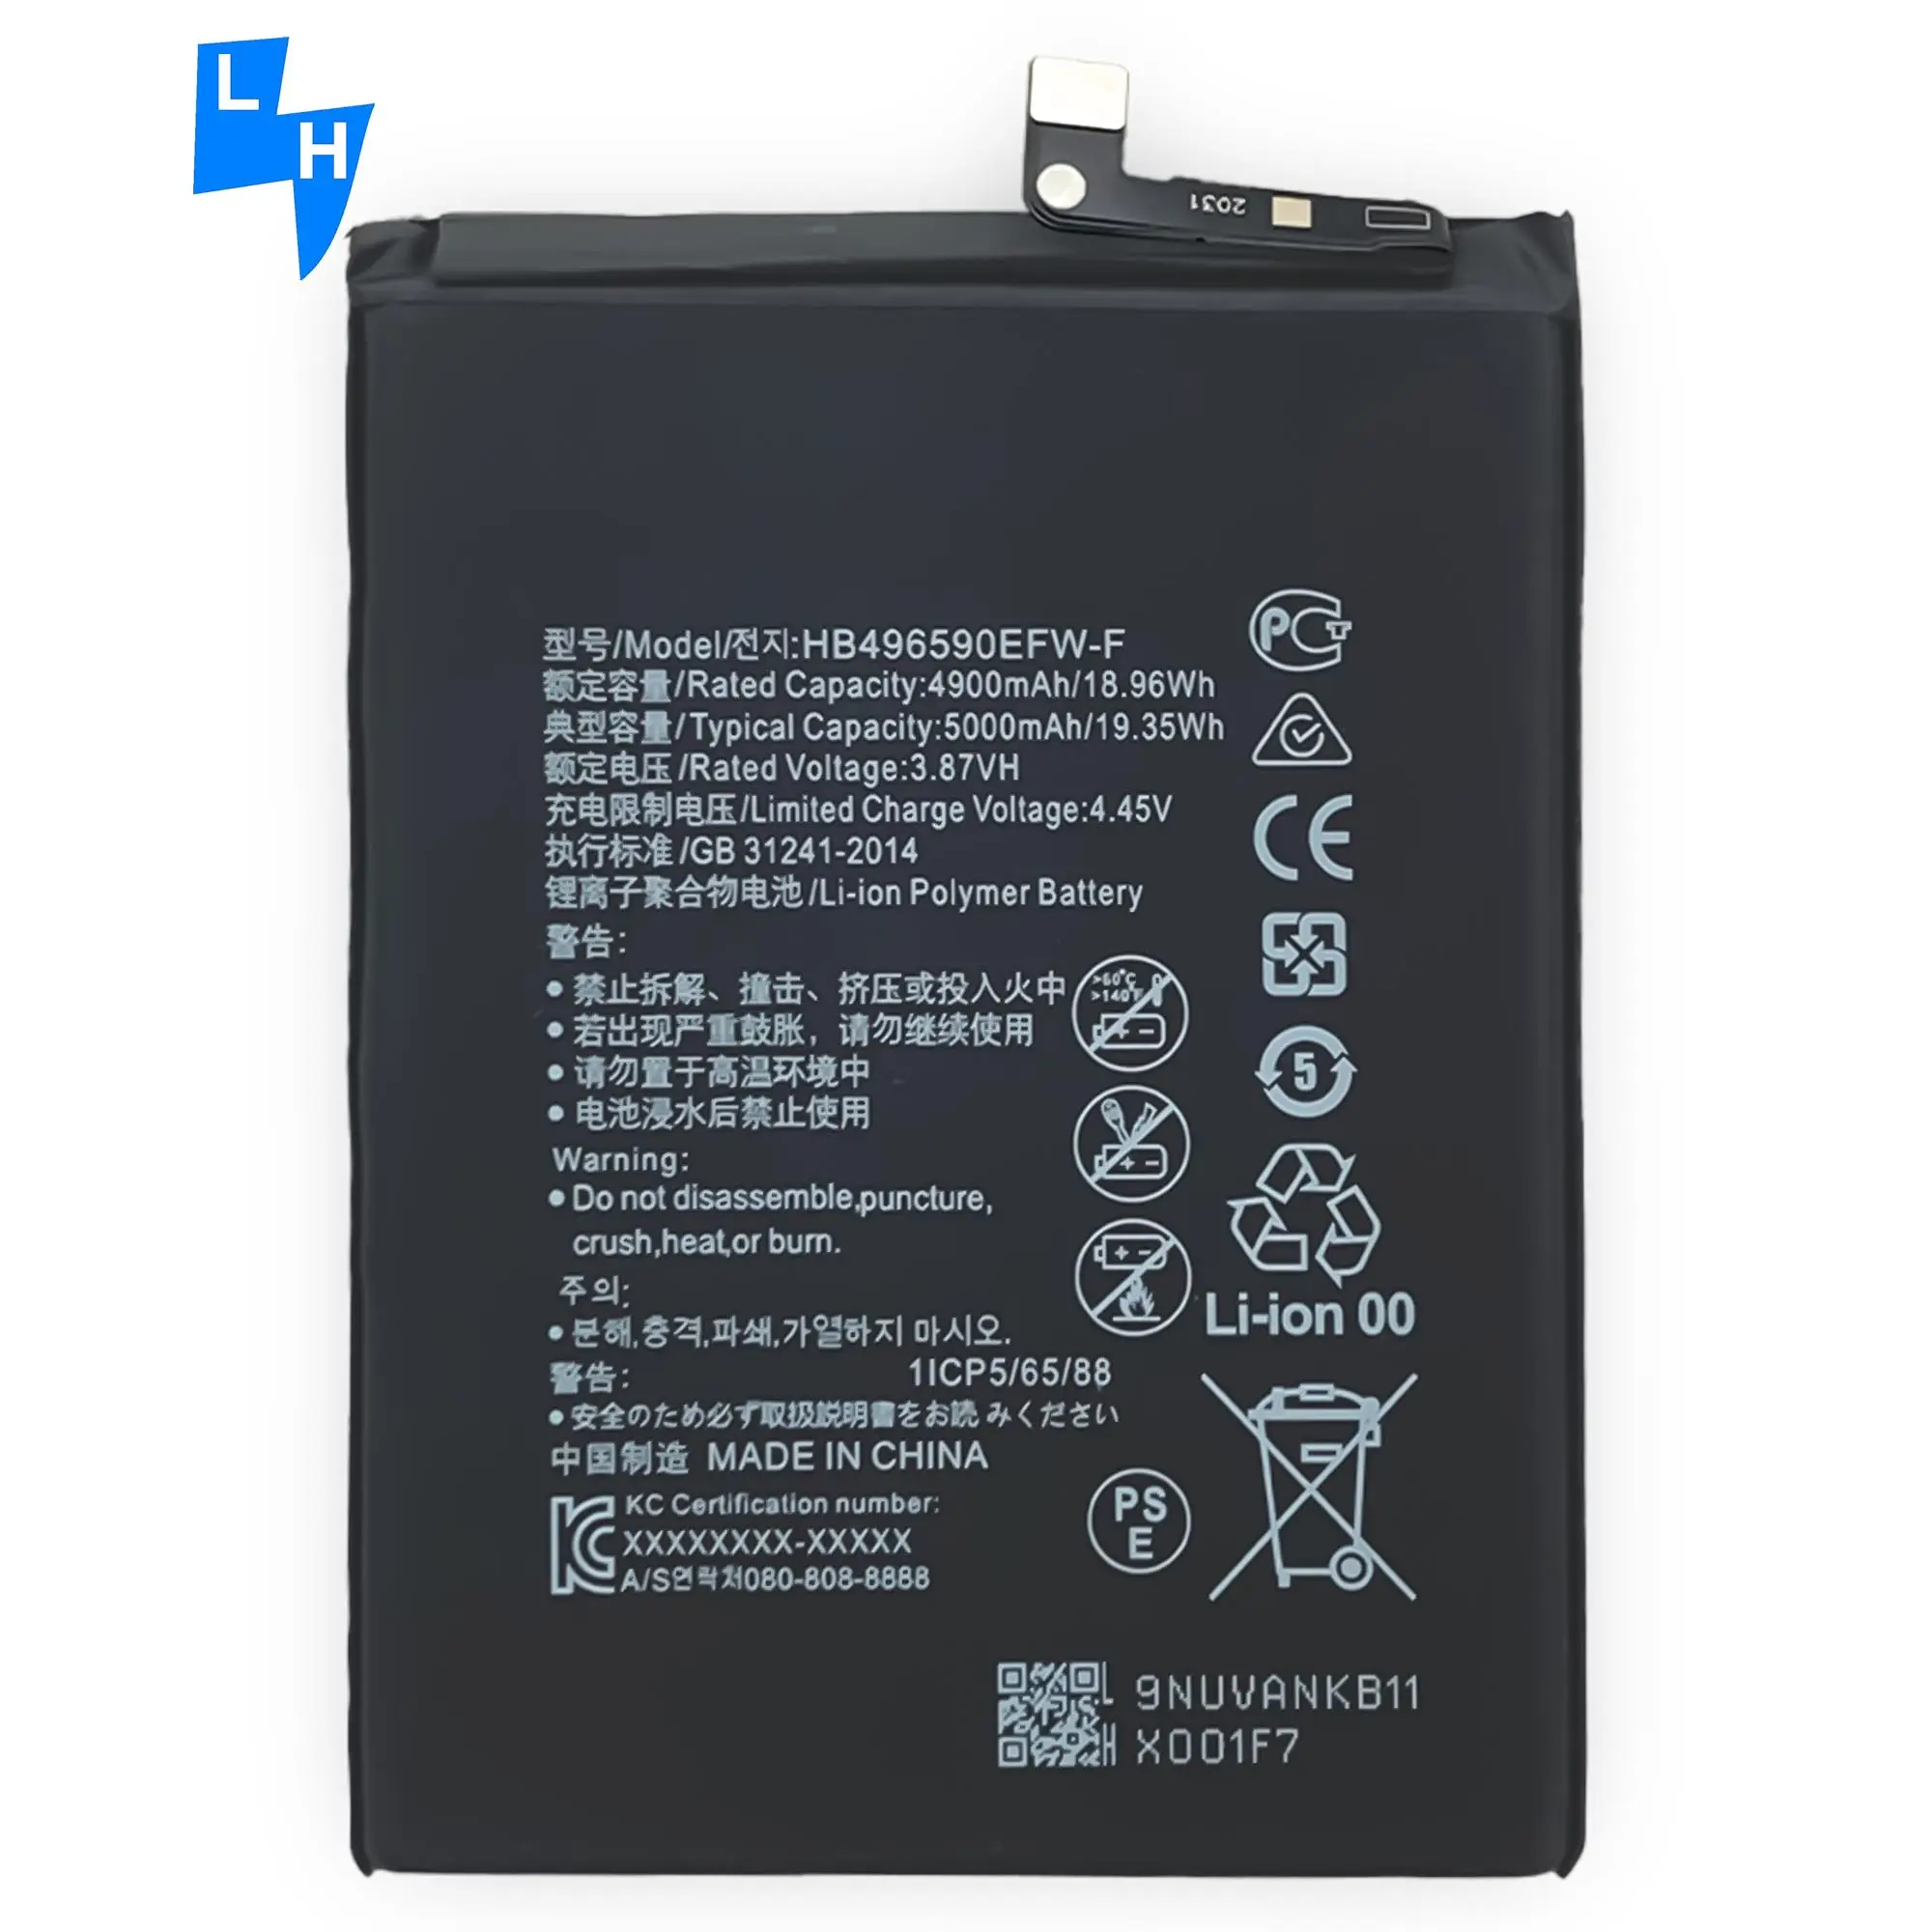 5000mAh HB496590EFW-F mobile phone battery for Huawei New mobile battery